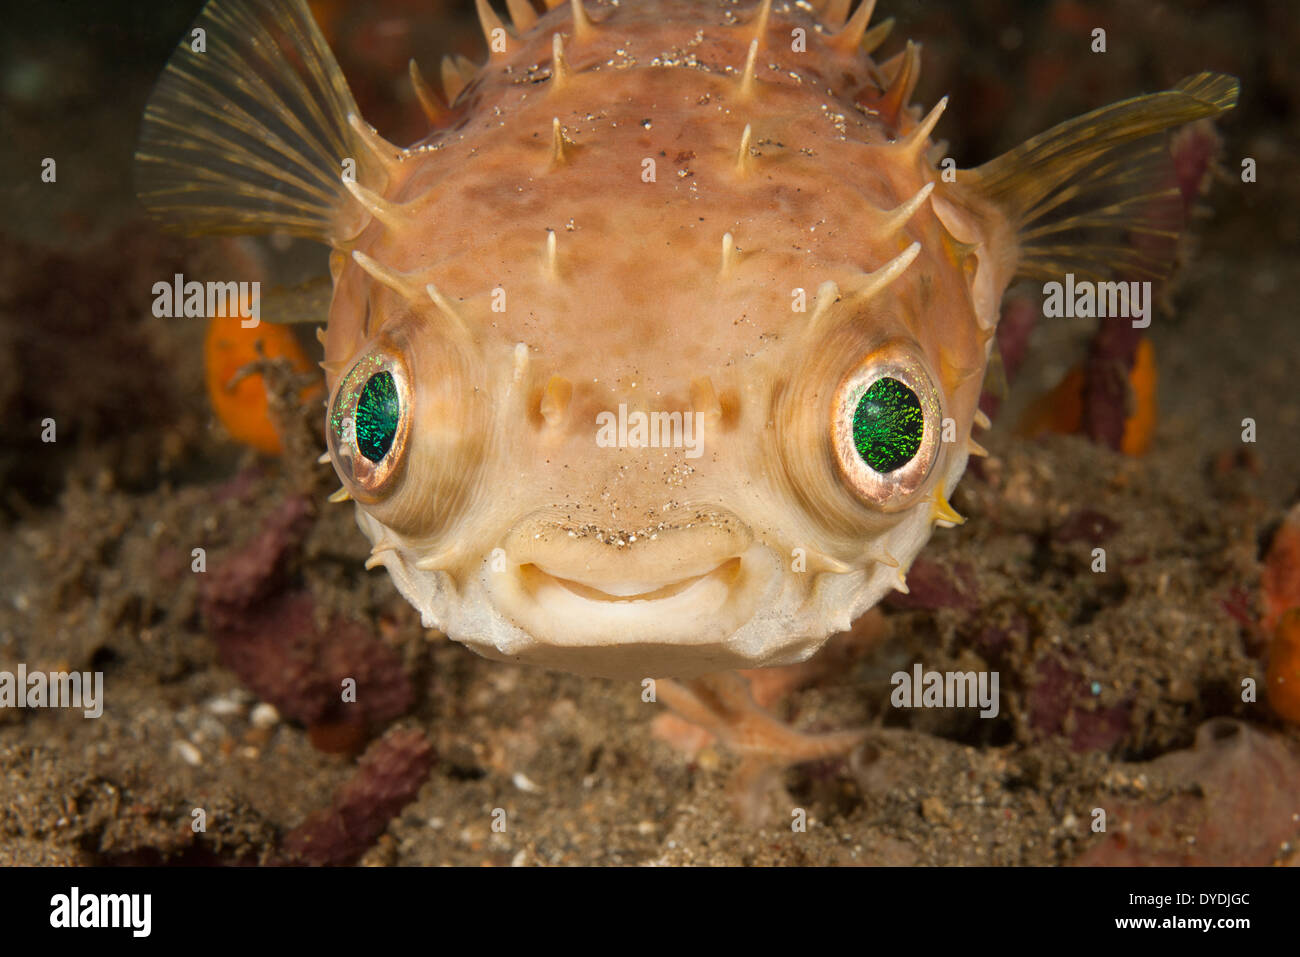 Orbicular Burrfish (Cyclichthys orbicularis) in the Lembeh Strait off North Sulawesi, Indonesia. Stock Photo